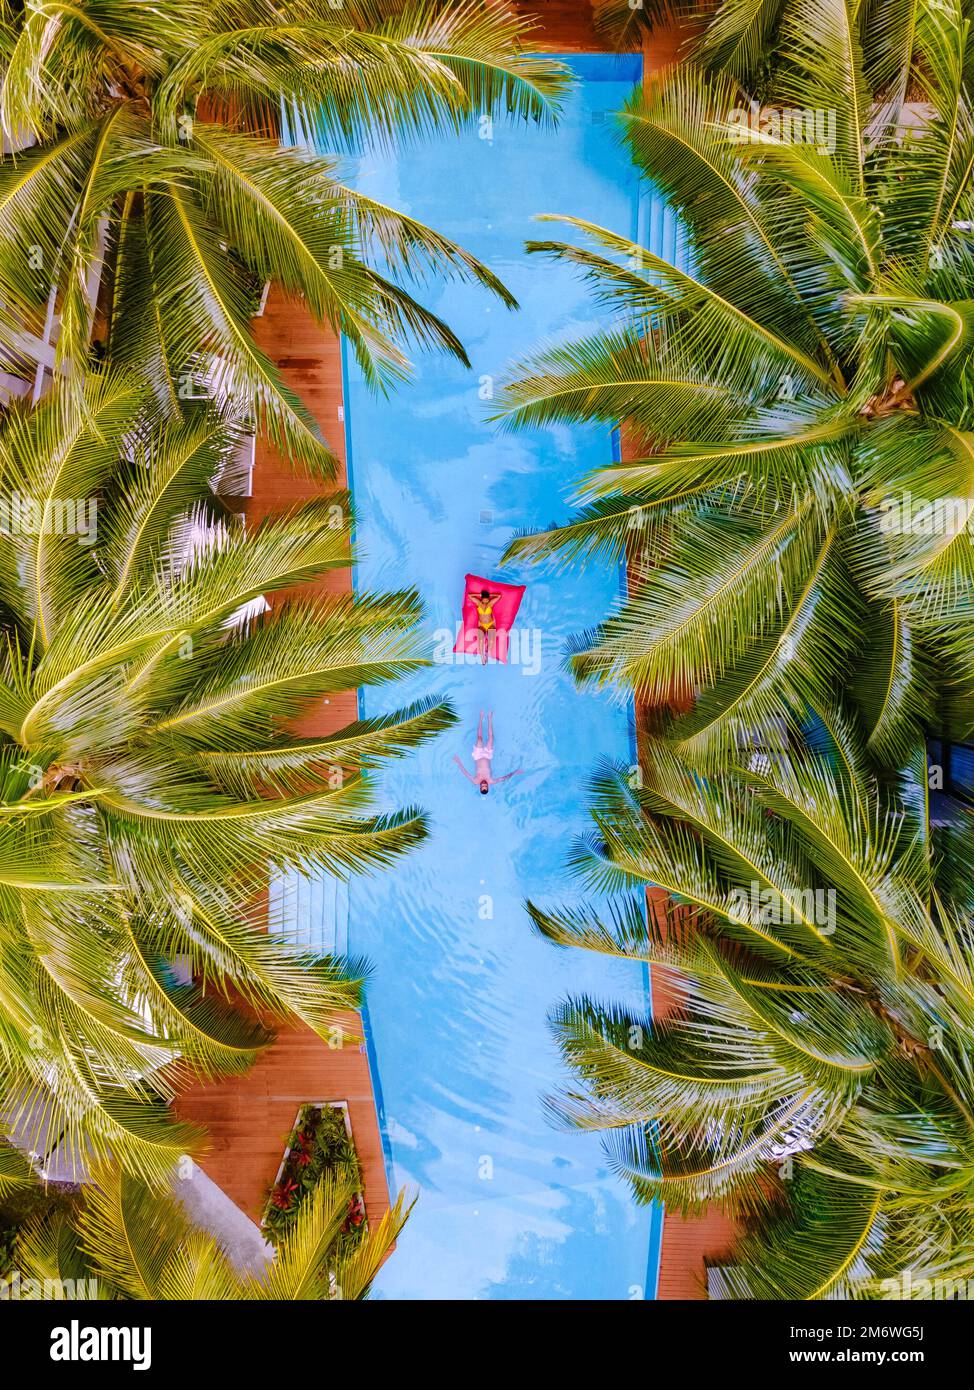 Drone view at swimming pool with palm trees, couple men and women in swimming pool Stock Photo